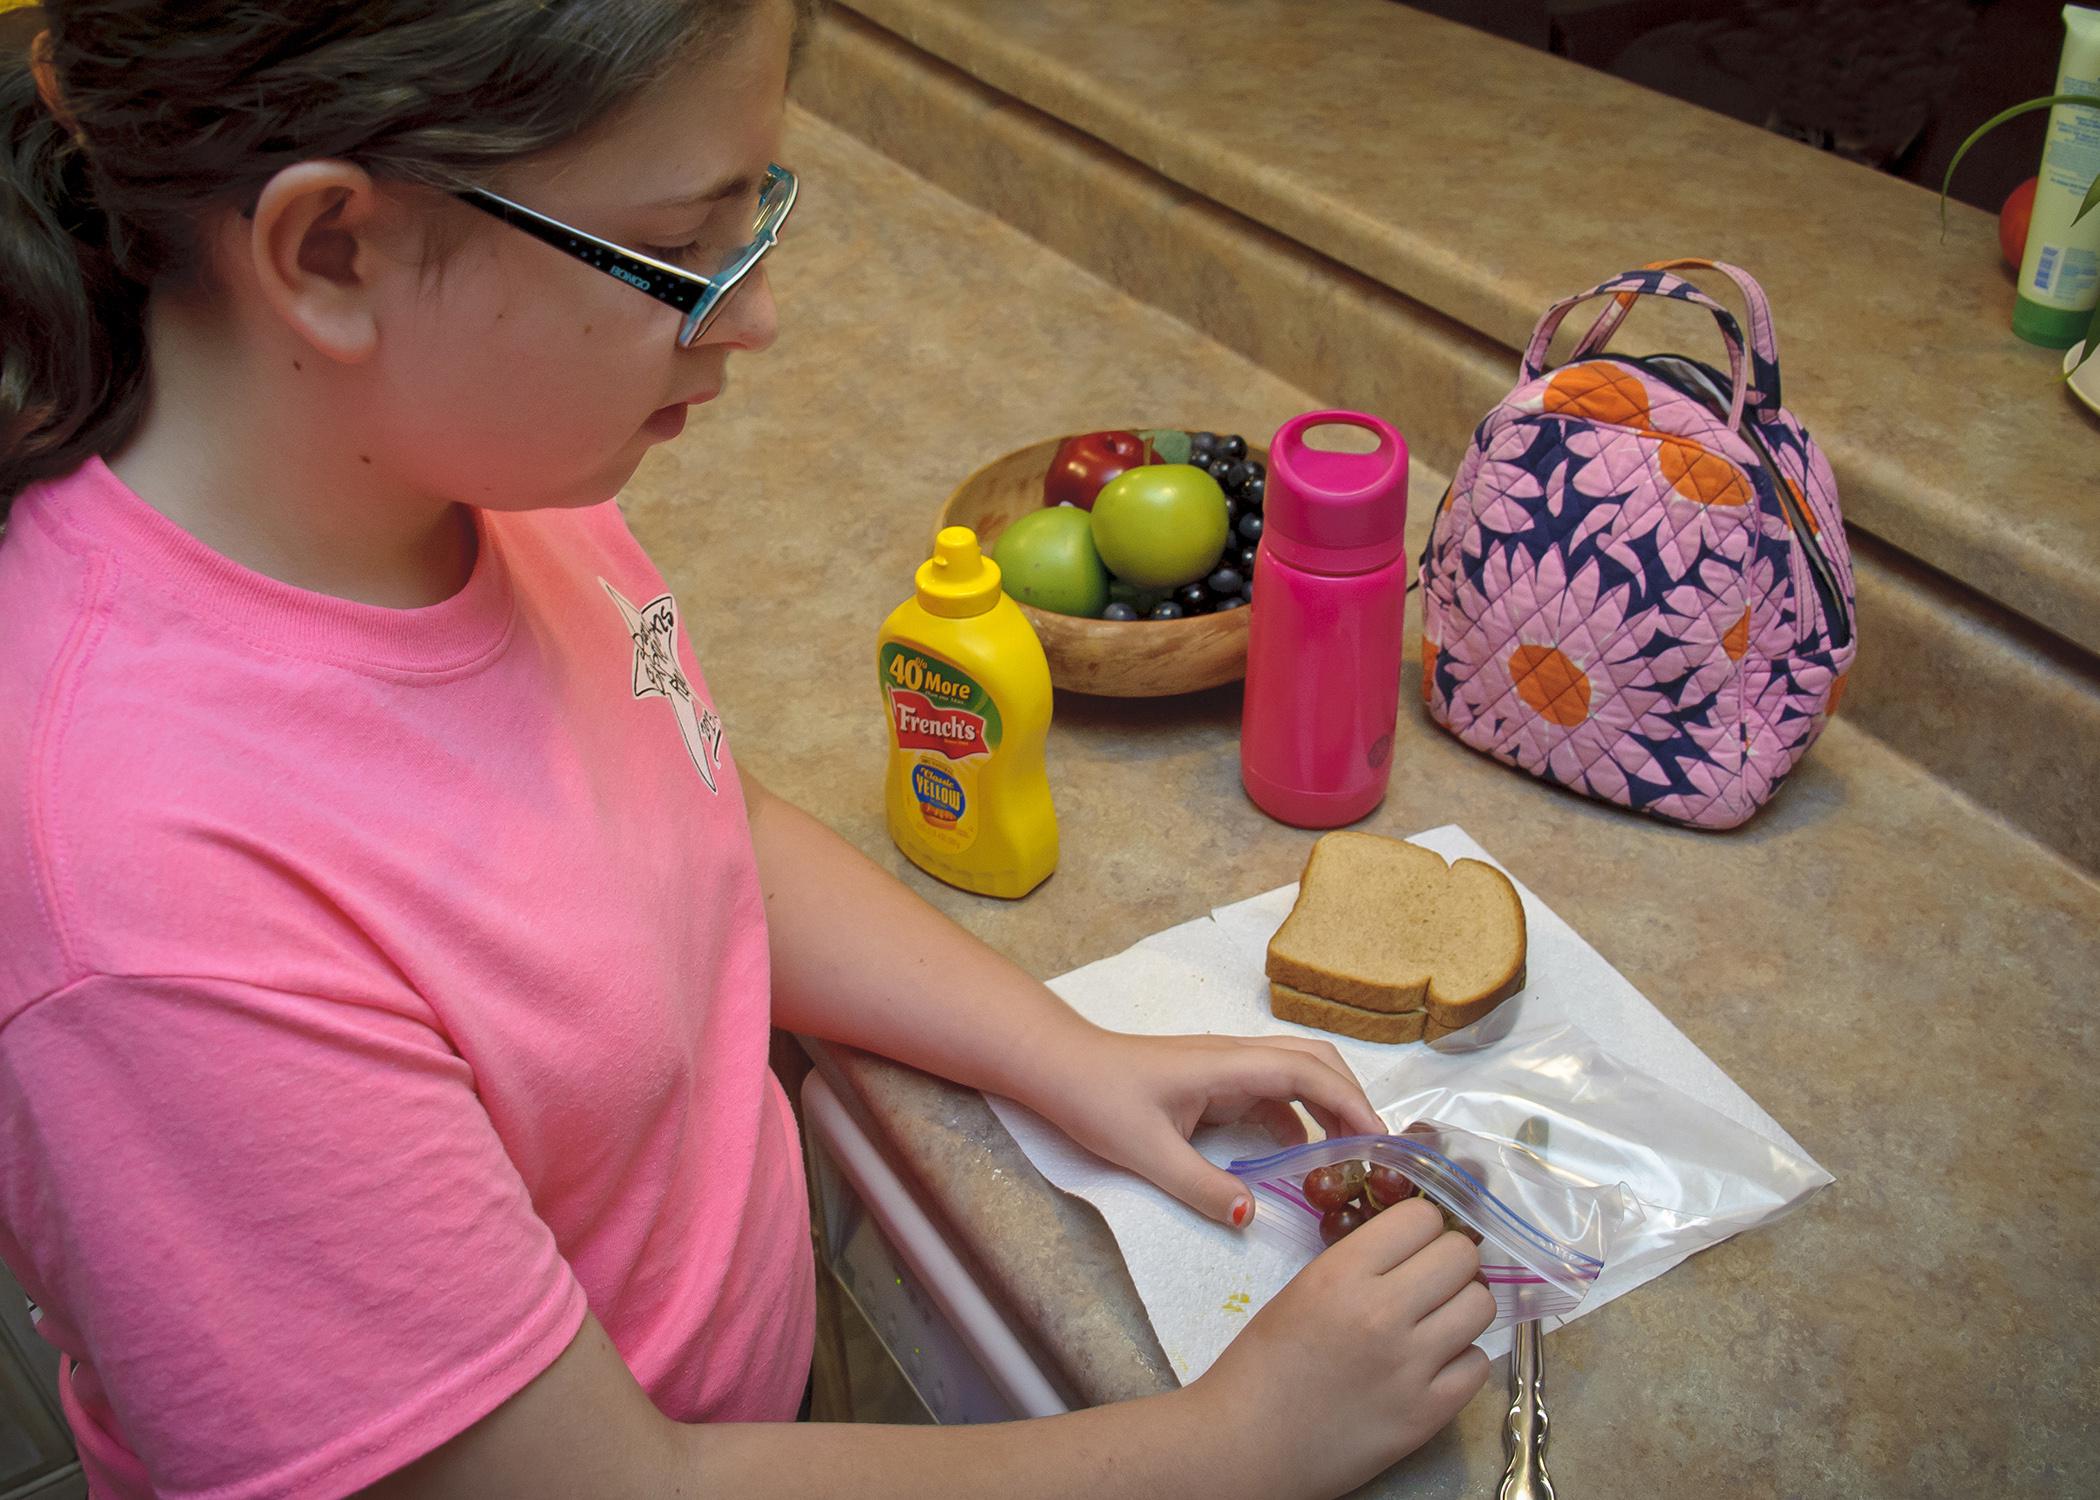 When packing lunches, children and adults need to follow good hygiene and food safety practices, such as starting with clean hands, a clean work surface and a clean lunch box. (Photo by MSU Ag Communications/Kevin Hudson)